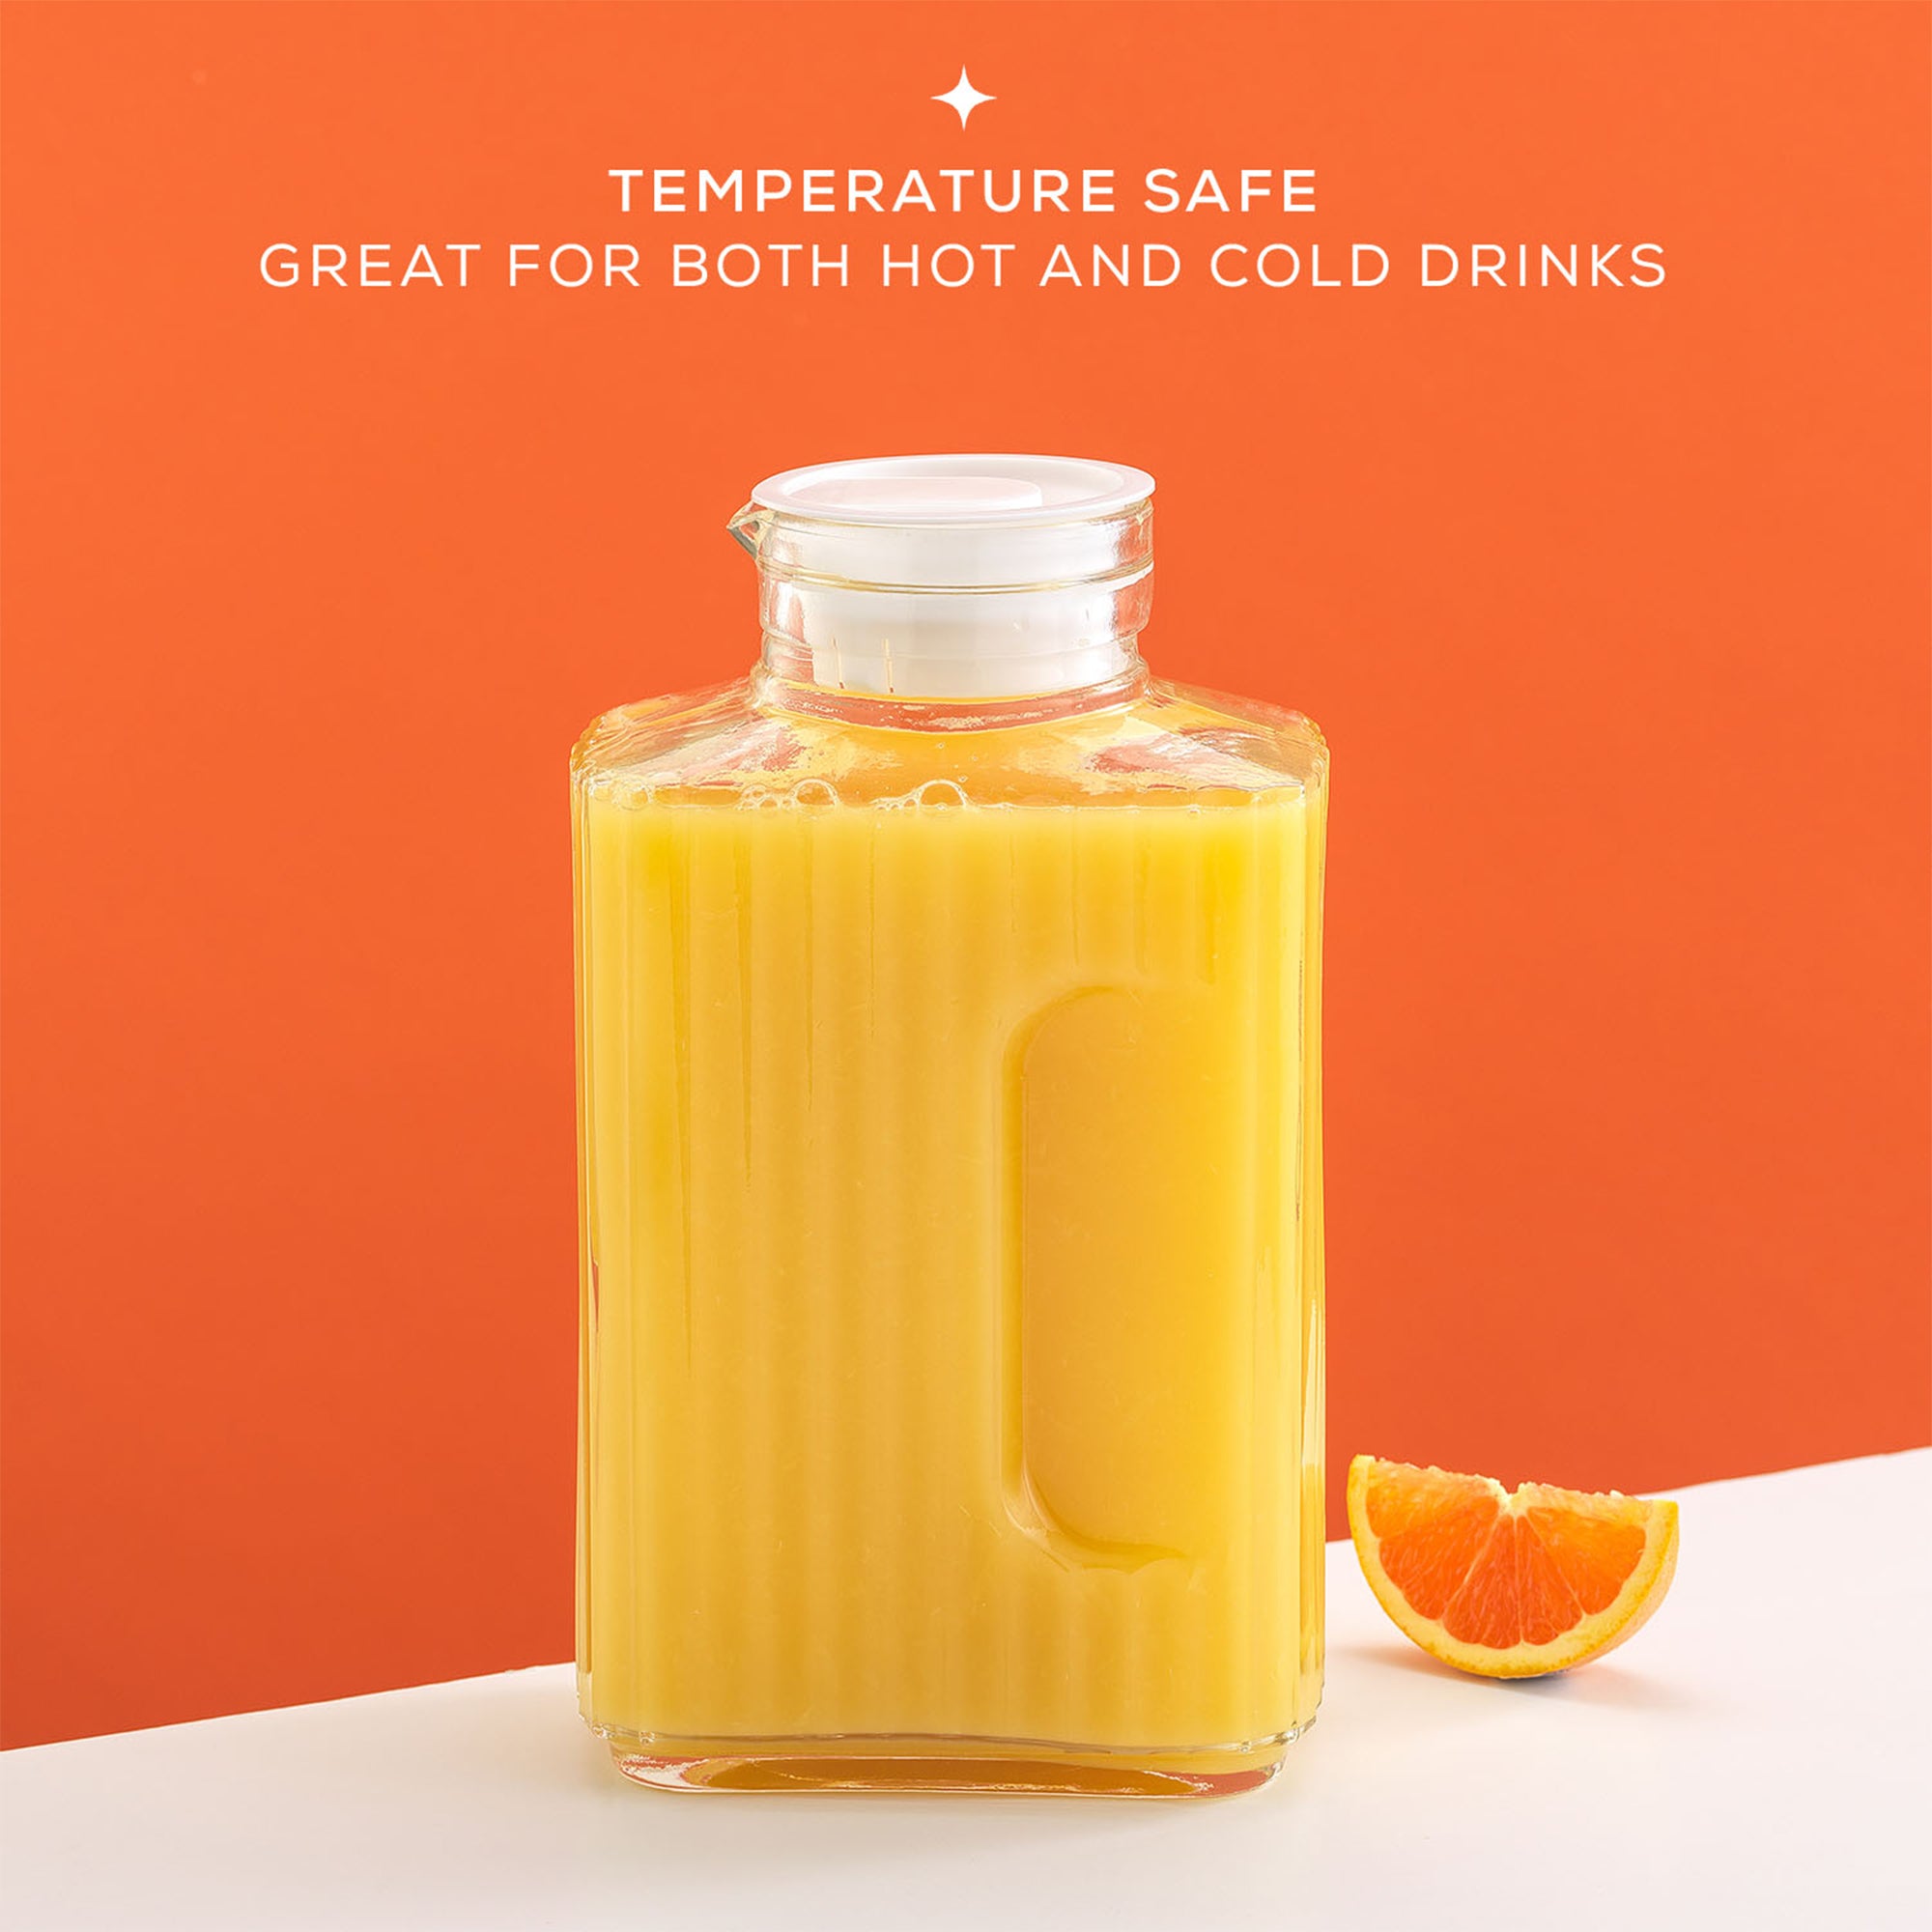 A large, glass JoyJolt Beverage Serveware Glass Pitcher filled with orange juice sits on a table next to a whole orange. The pitcher has a leak-proof lid and a handle for easy pouring. Text on the image reads: "TEMPERATURE SAFE. GREAT FOR BOTH HOT AND COLD DRINKS."